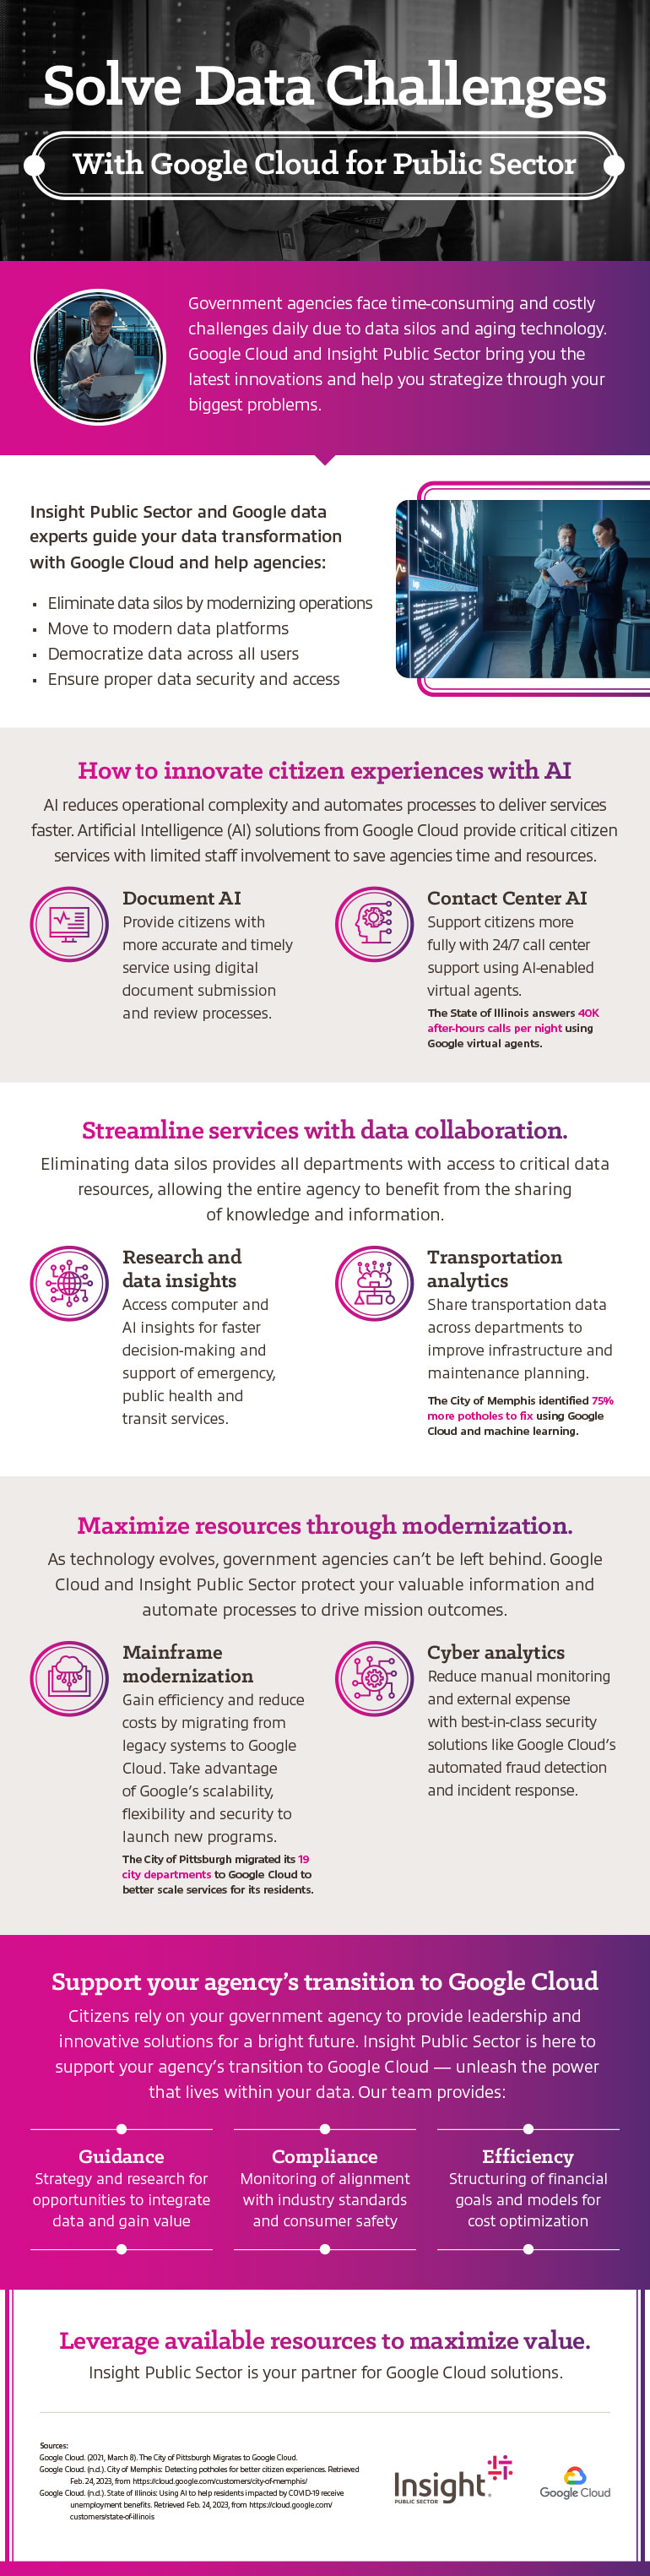 Solve Data Challenges With Google Cloud for Public Sector infographic